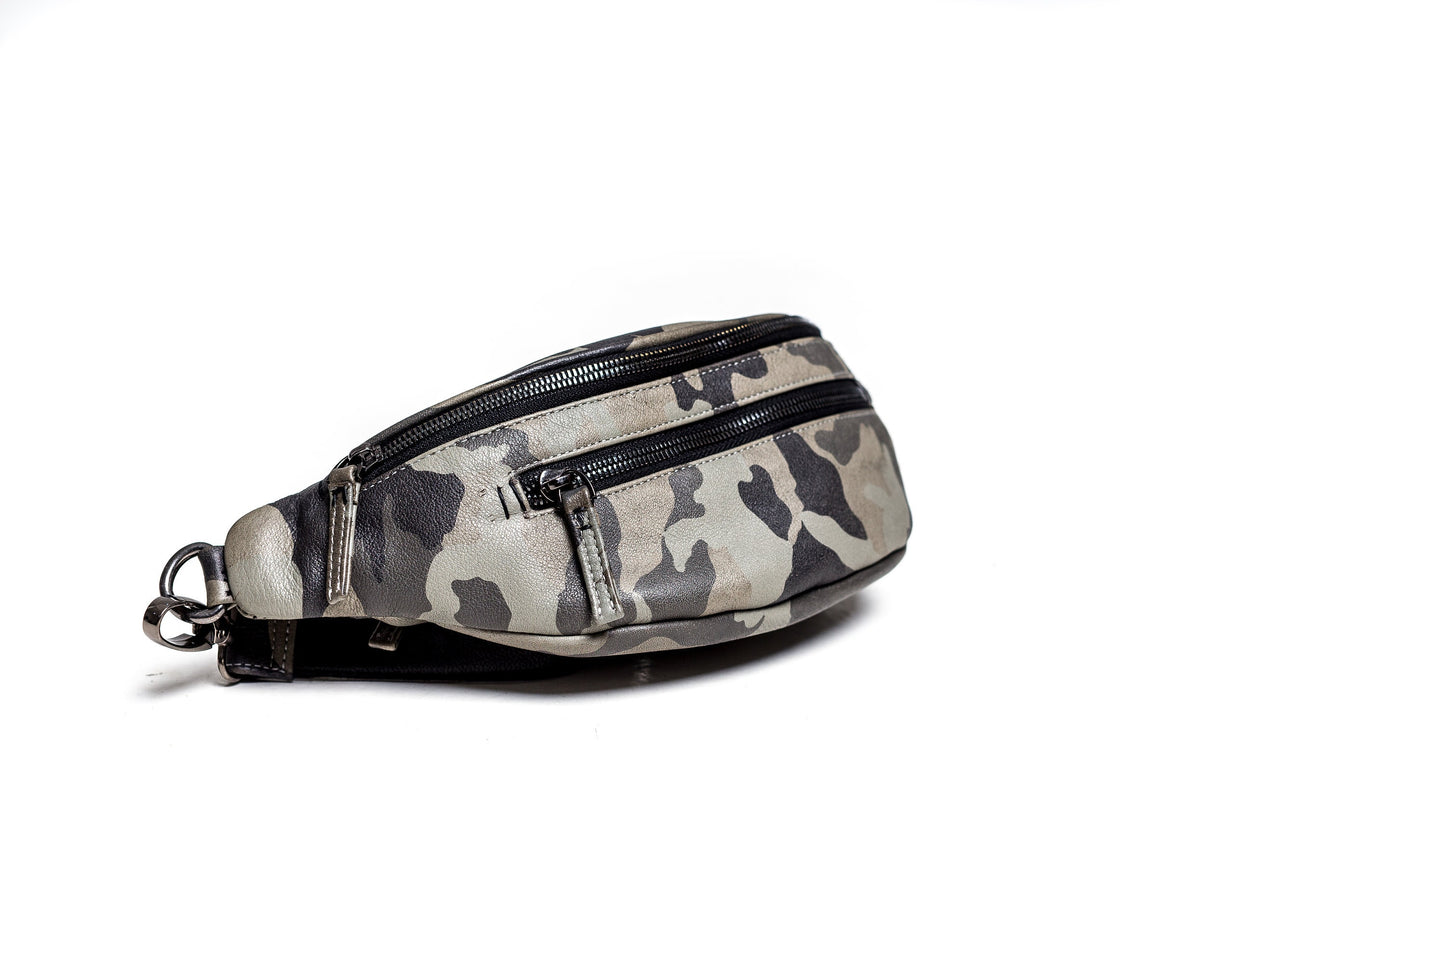 Cities in Dust Stone Grey Camo Leather Fanny Pack Passport Holder